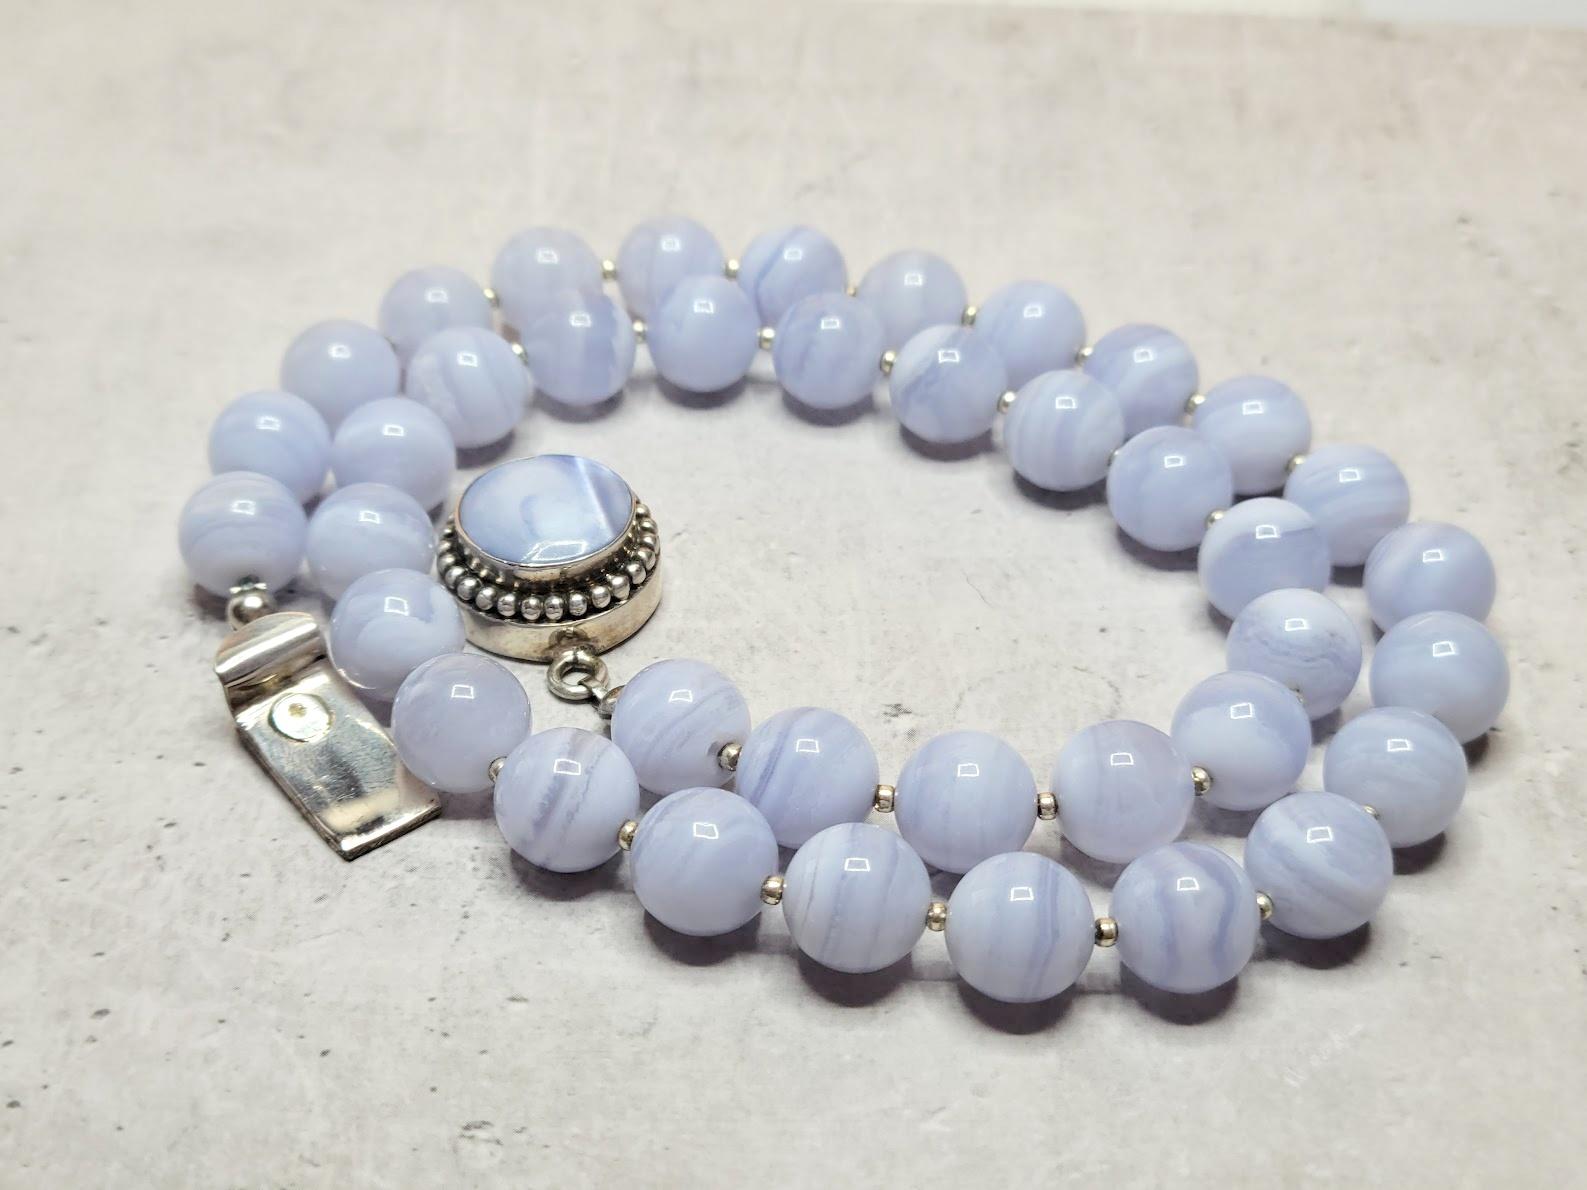 The length of the necklace is 19 inches (48 cm).
The size of the smooth round beads is 10 mm.

Blue Agate and Blue Lace Agate are interchangeable names of the same type of banded Chalcedony belonging to the microcrystalline Quartz family. However,